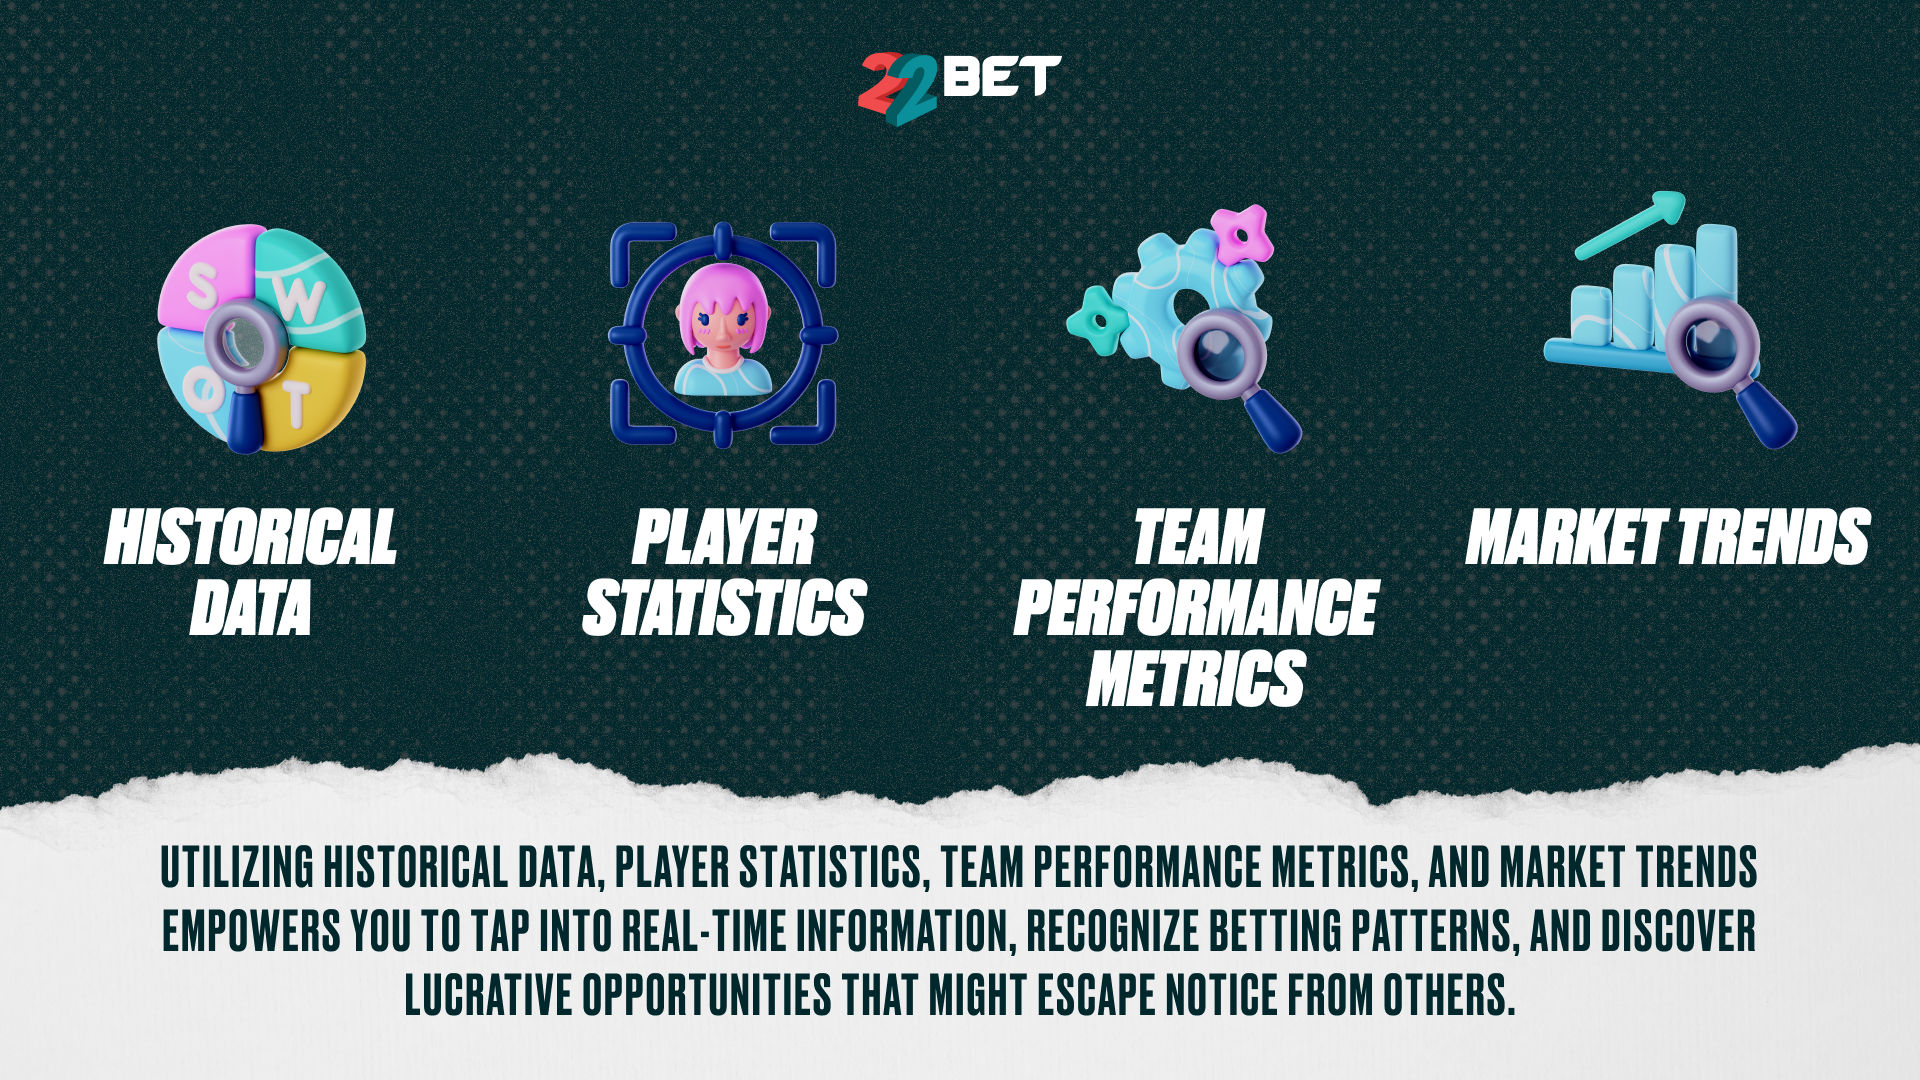 Using sports betting tools to discover lucrative opportunities by processing historical data, player statistics, team performance metrics, and market trends.